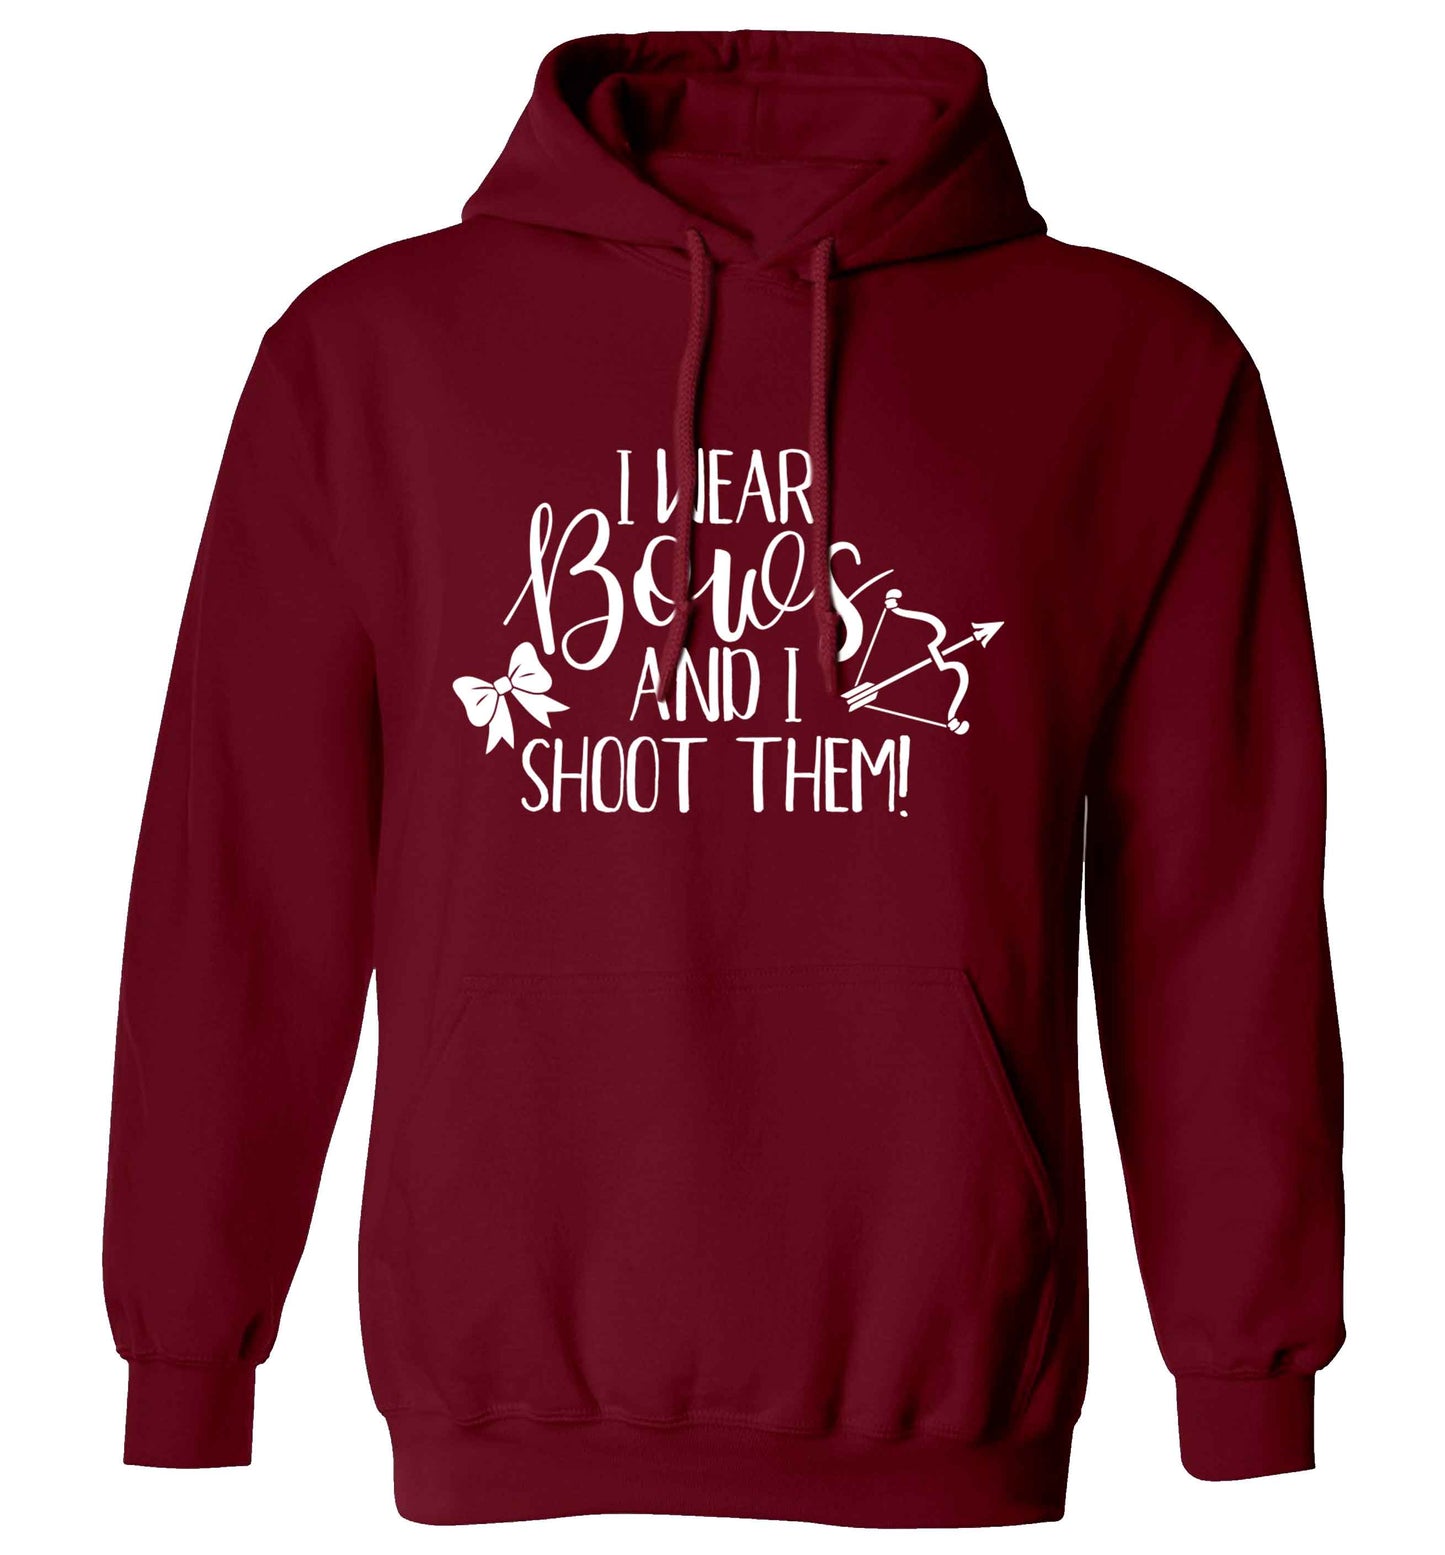 I wear bows and I shoot them adults unisex maroon hoodie 2XL